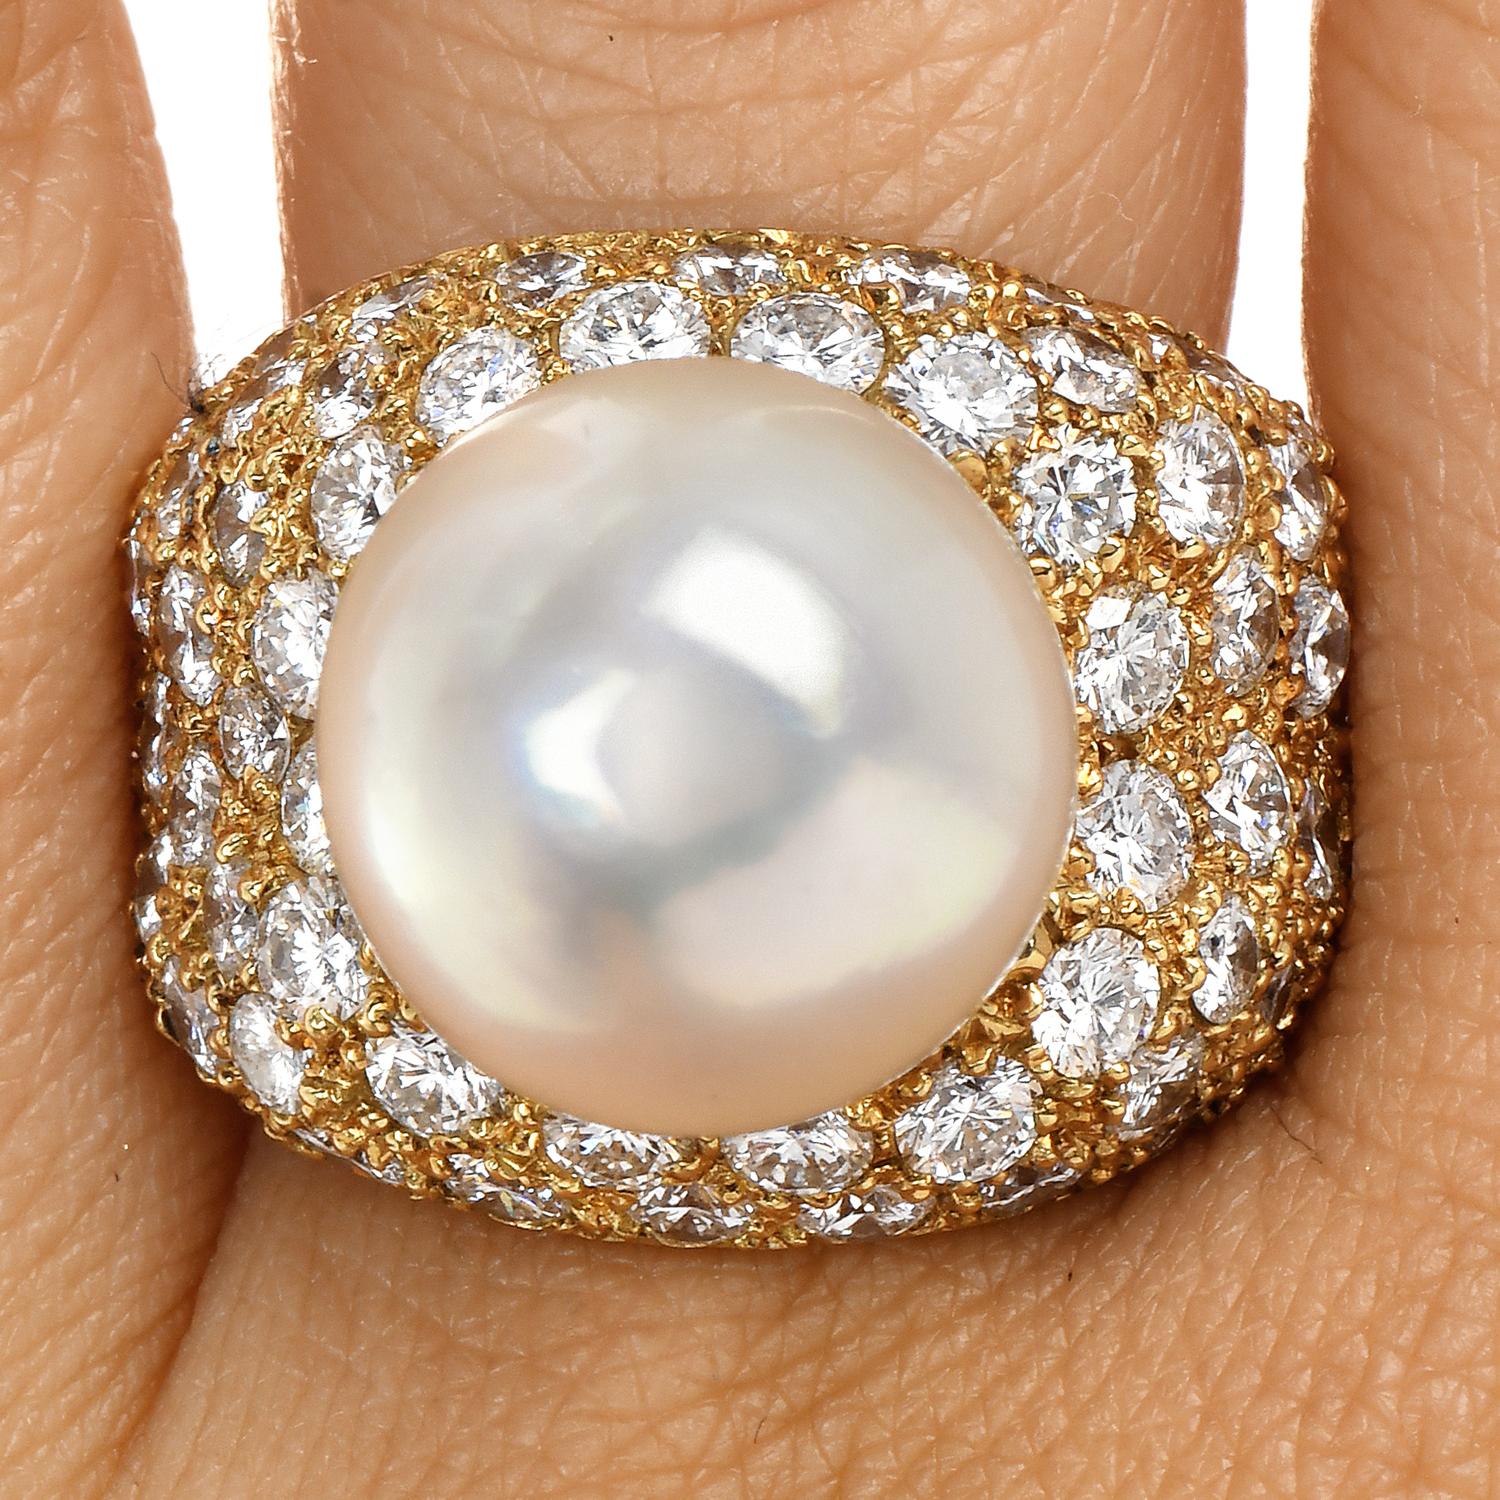 Retro Vintage 5.50ct Diamond South Sea Pearl 18k Yellow Gold Pave Cocktail Ring For Sale 2